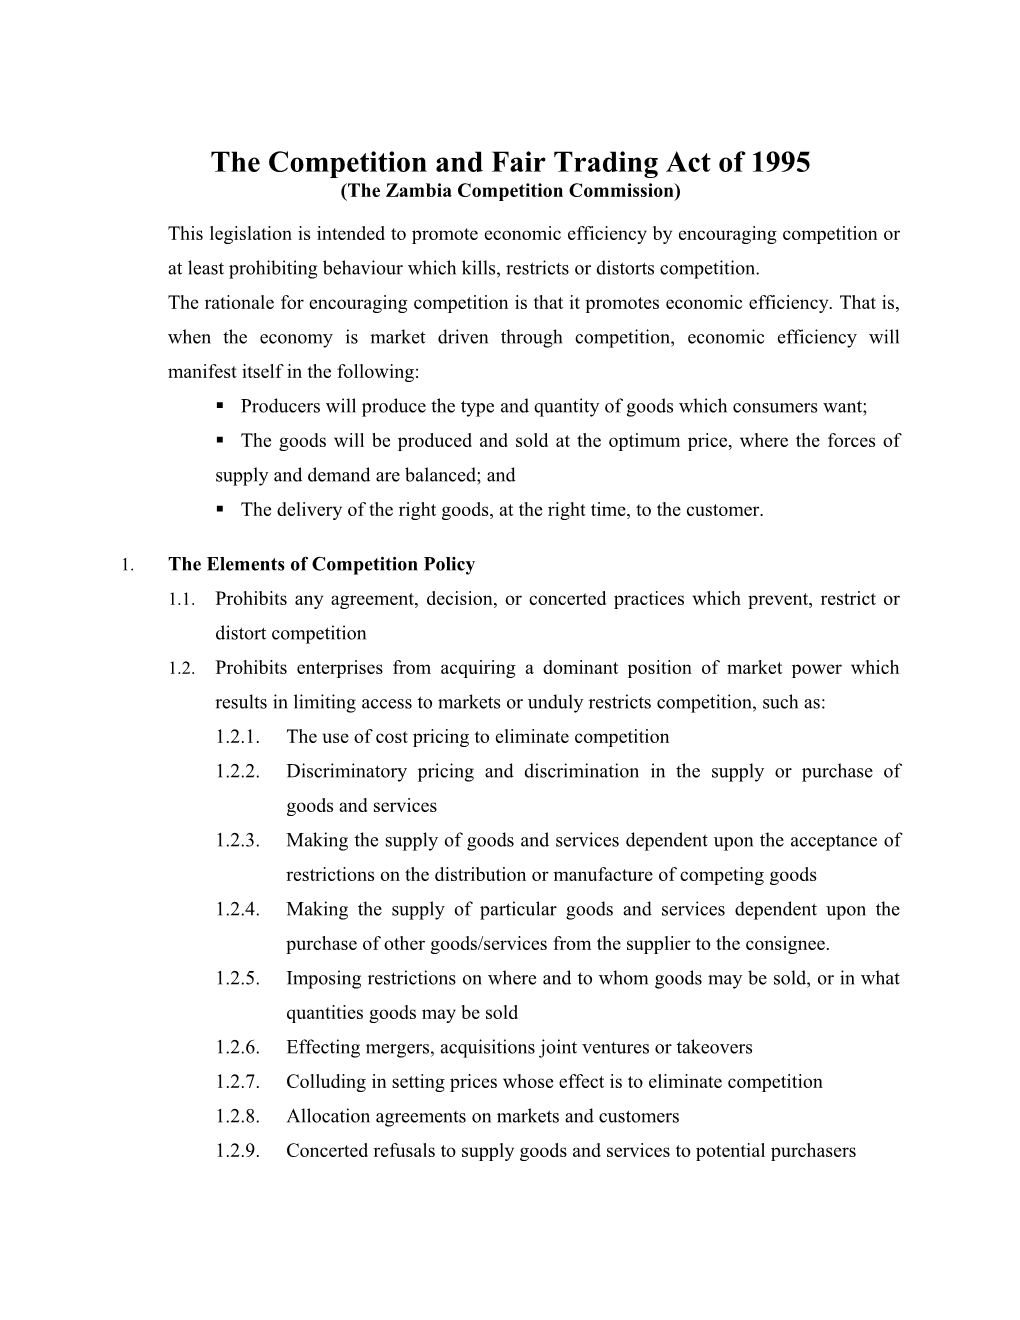 The Competition and Fair Trading Act of 1995